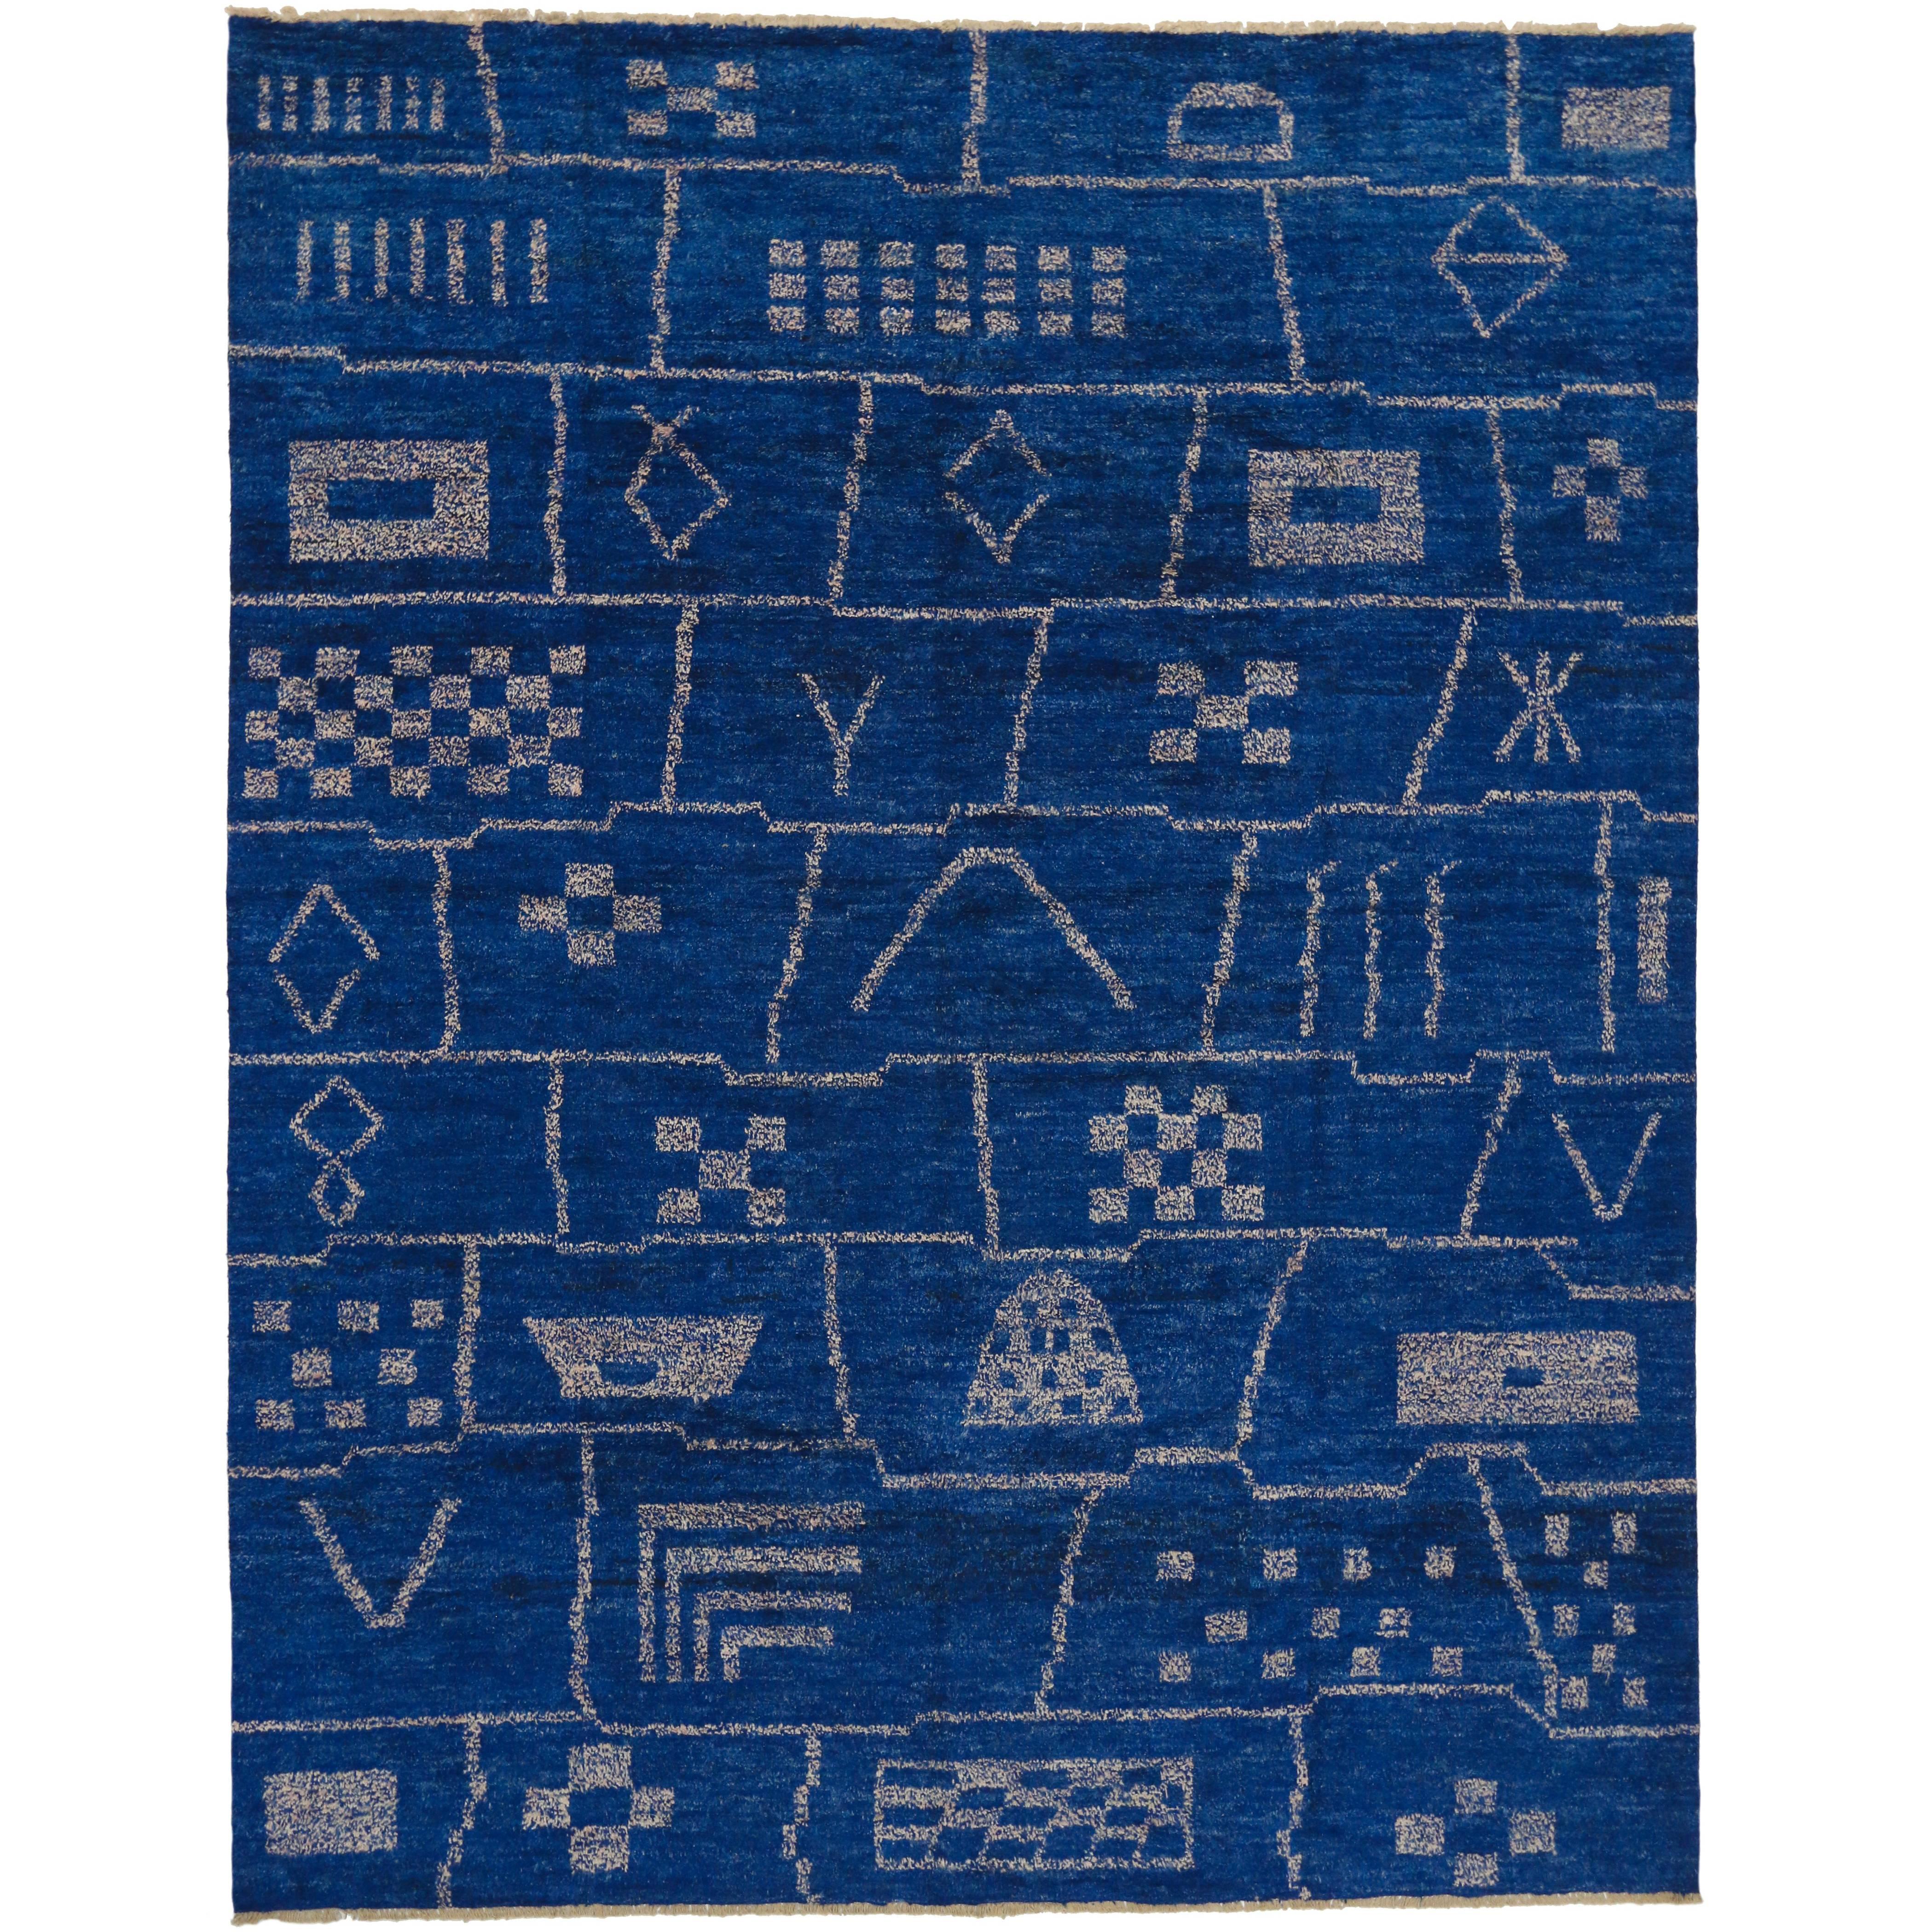 Contemporary Moroccan Style Area Rug in Cobalt Blue with Tribal Style